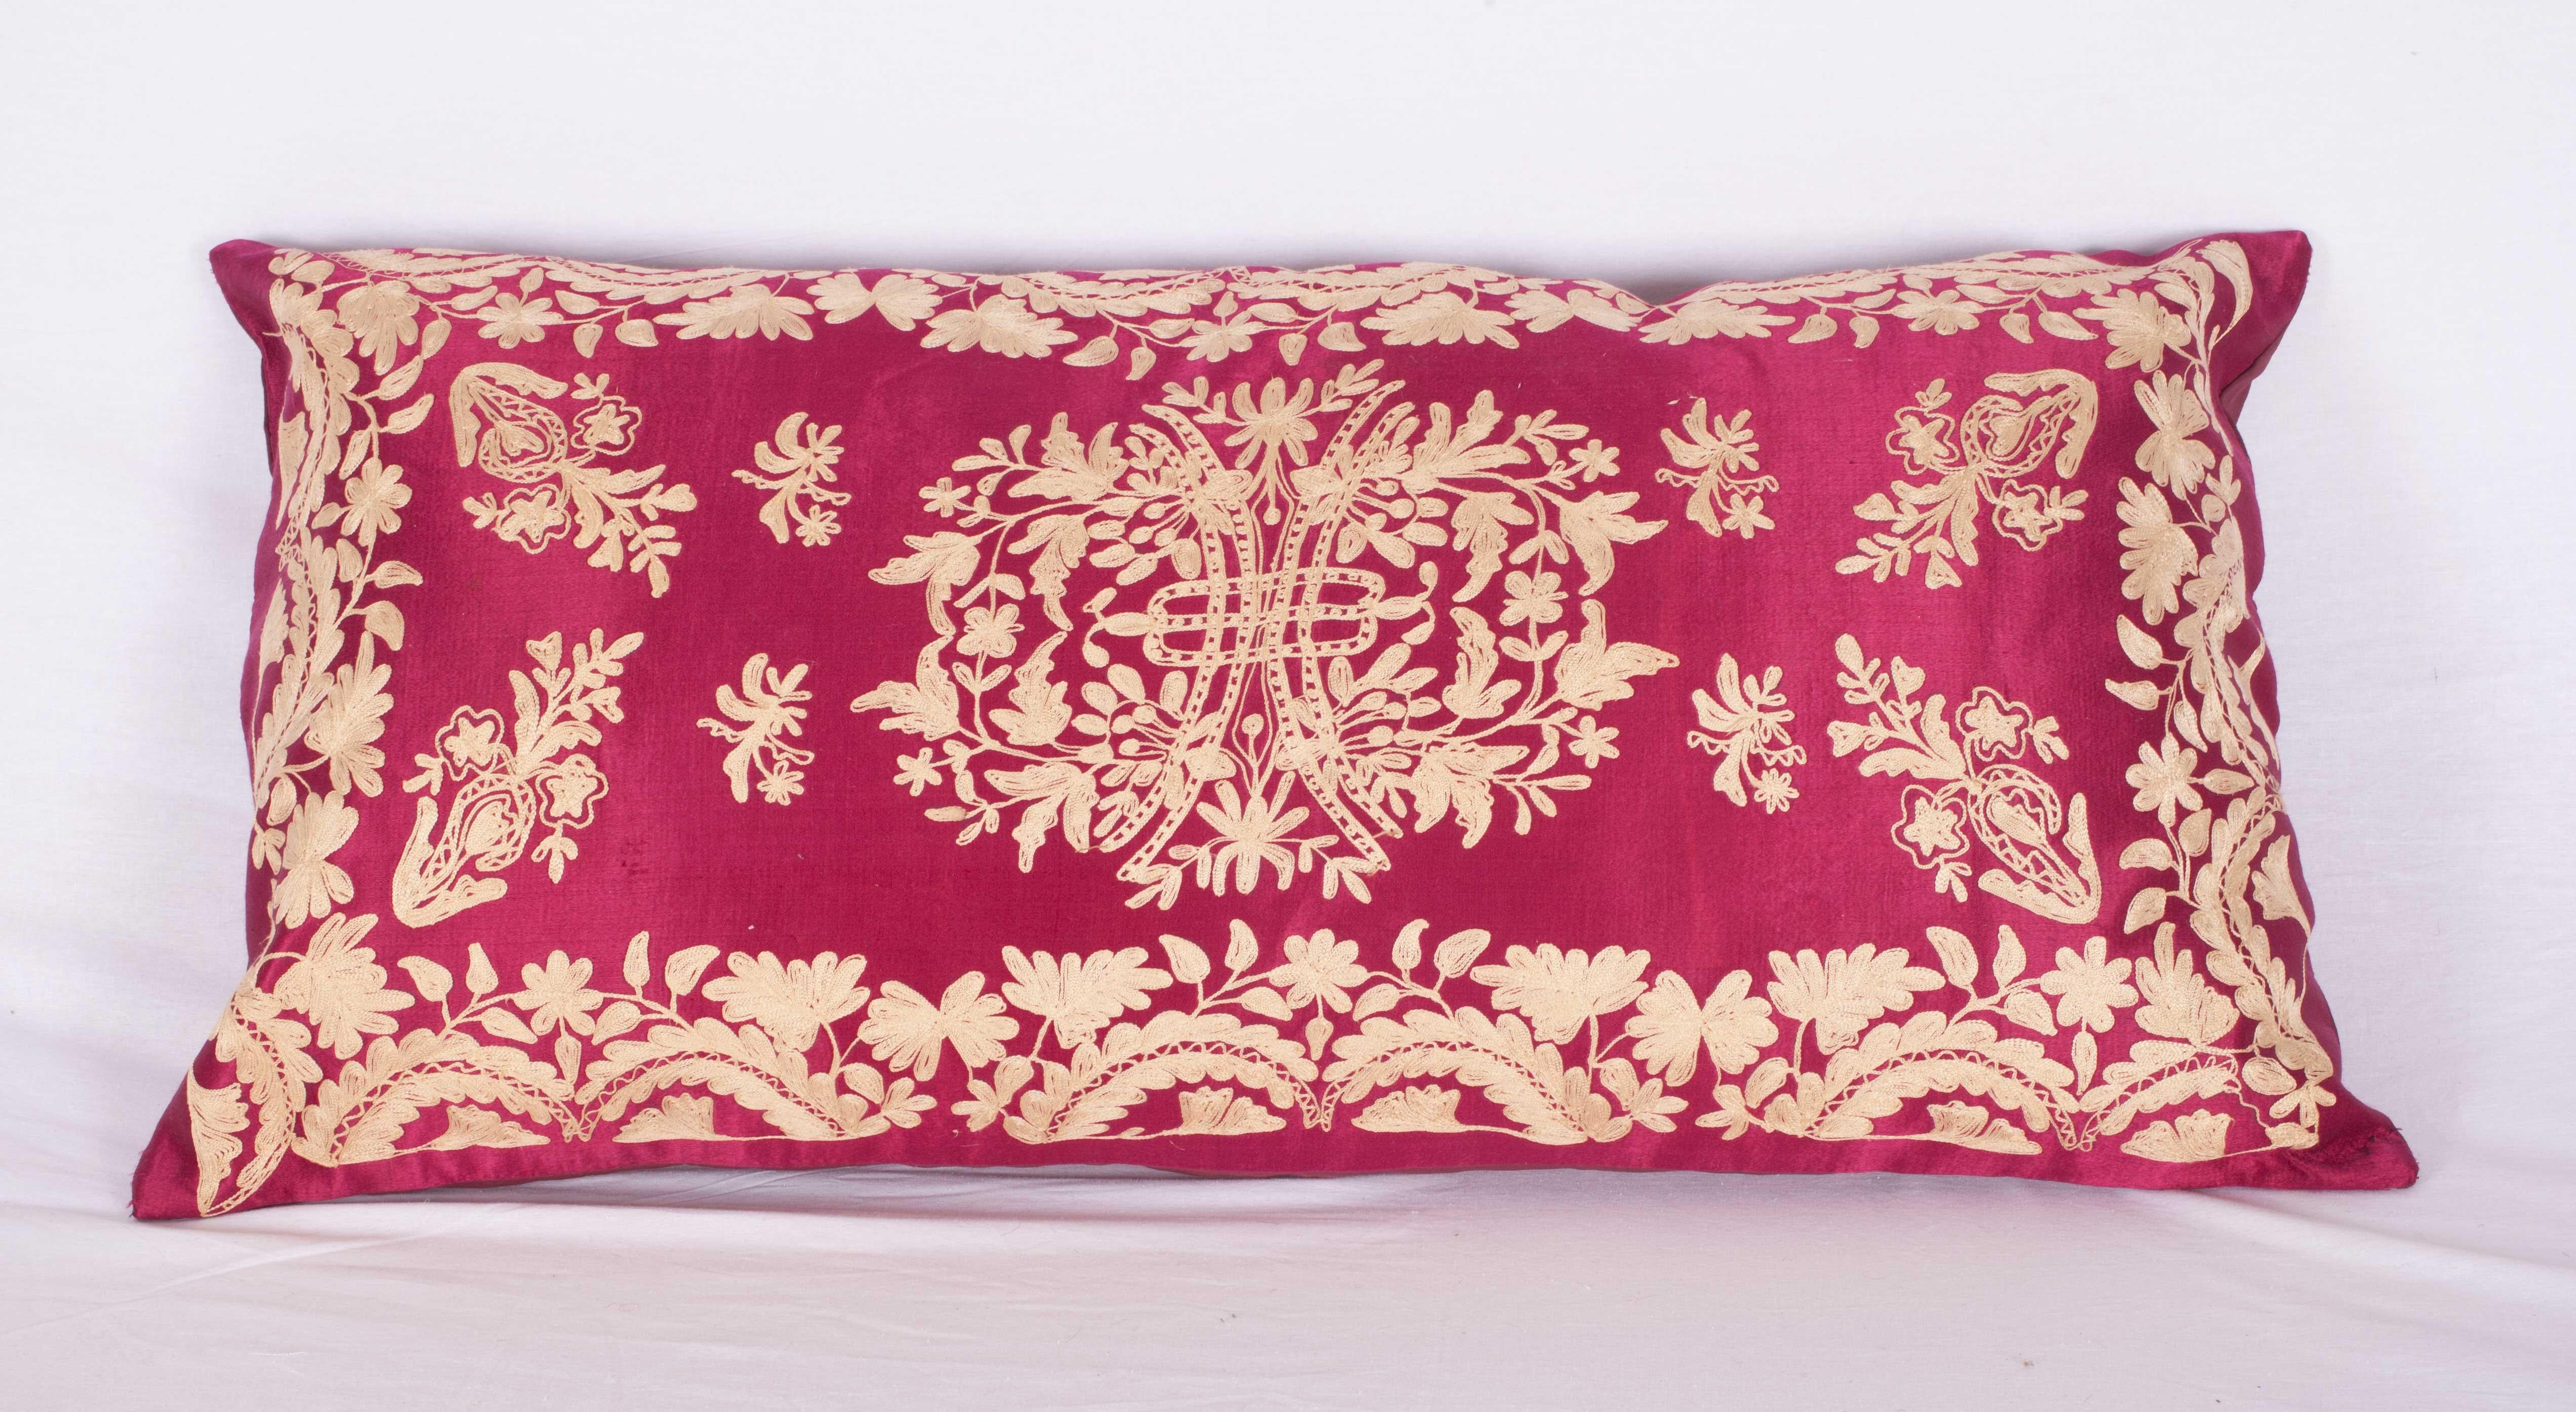 Antique Ottoman Turkish Pillow Cases Late 19th-Early 20th Century In Good Condition For Sale In Istanbul, TR